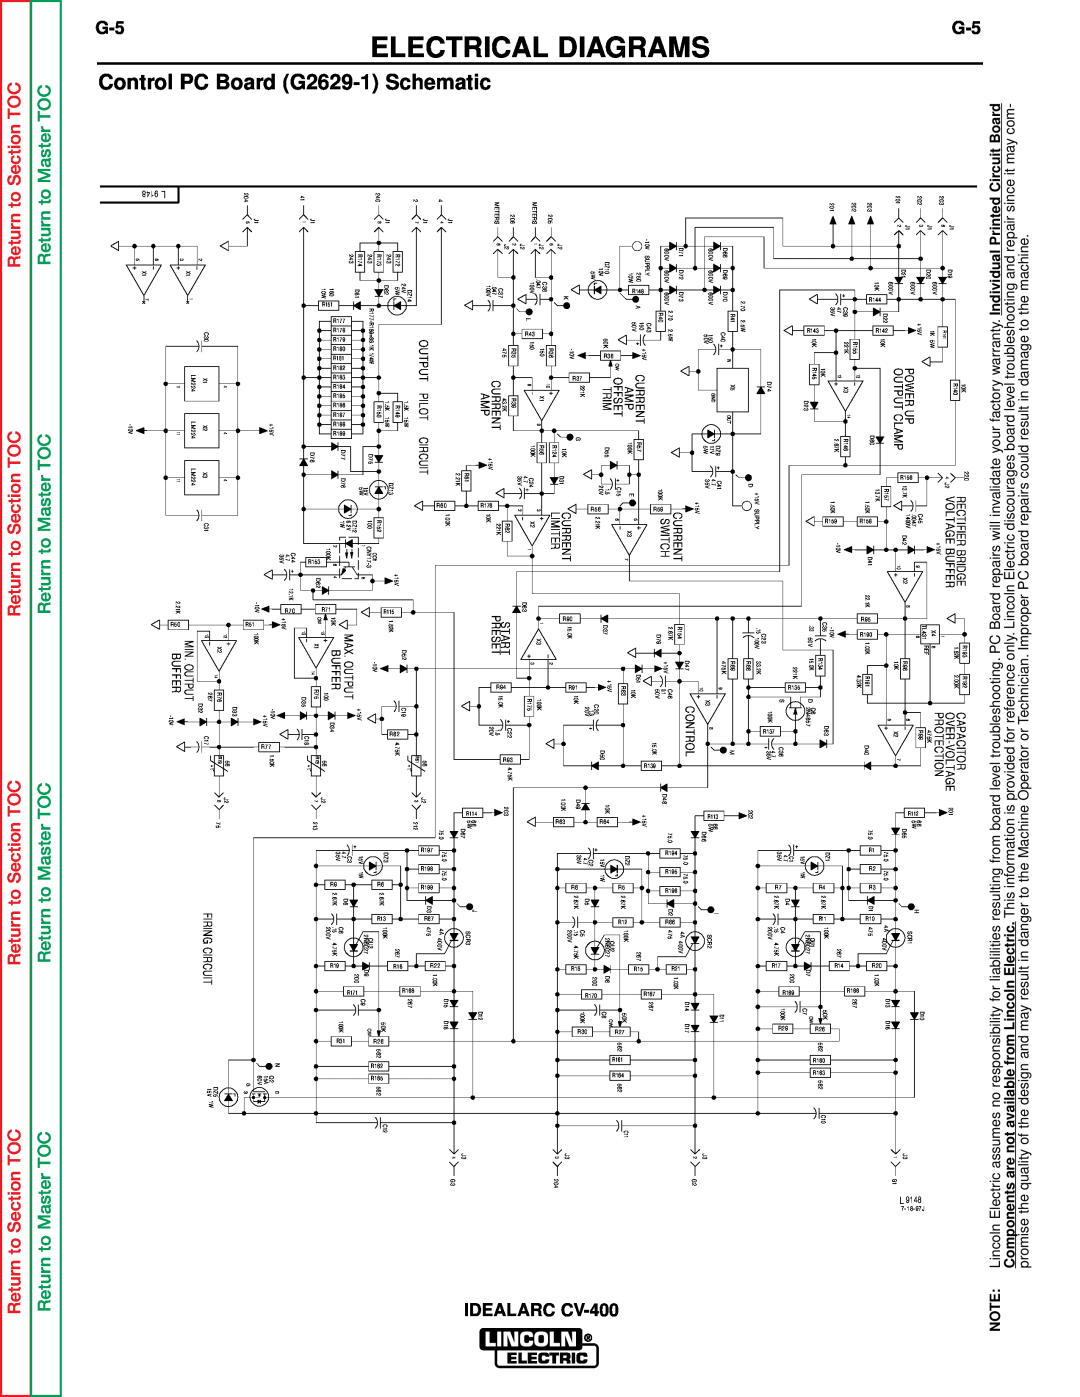 Lincoln Electric SVM136-A Control PC Board G2629-1 Schematic, Electrical Diagrams, to Section TOC, Return to Master TOC 